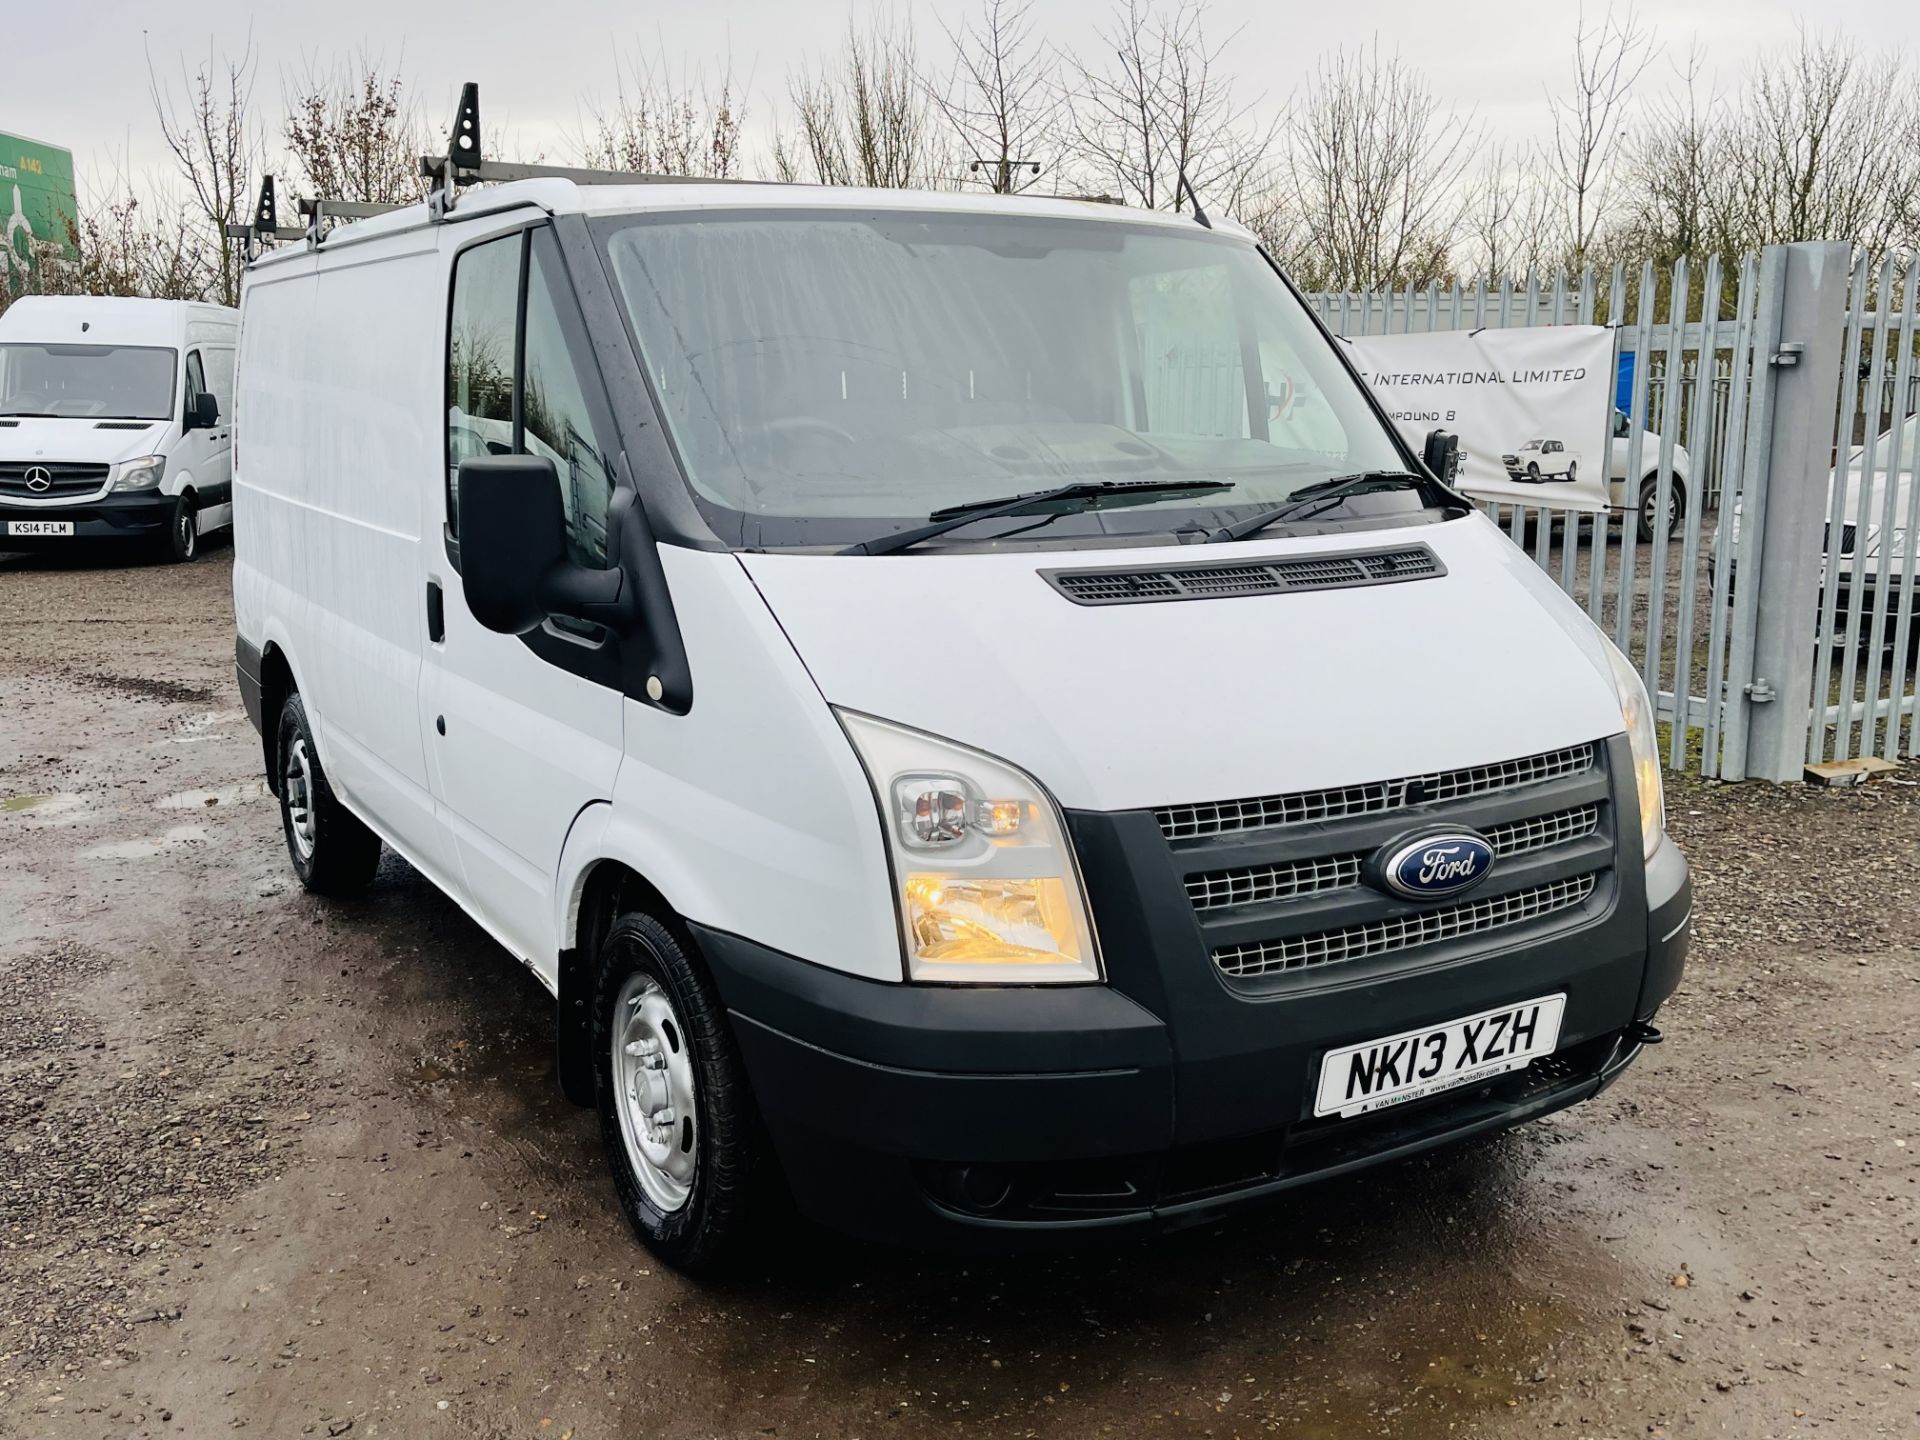 ** ON SALE ** Ford Transit 2.2 TDCI 100 FWD L1 H1 2013 '13 Reg' - Air con - No Vat Save 20% - Image 3 of 21